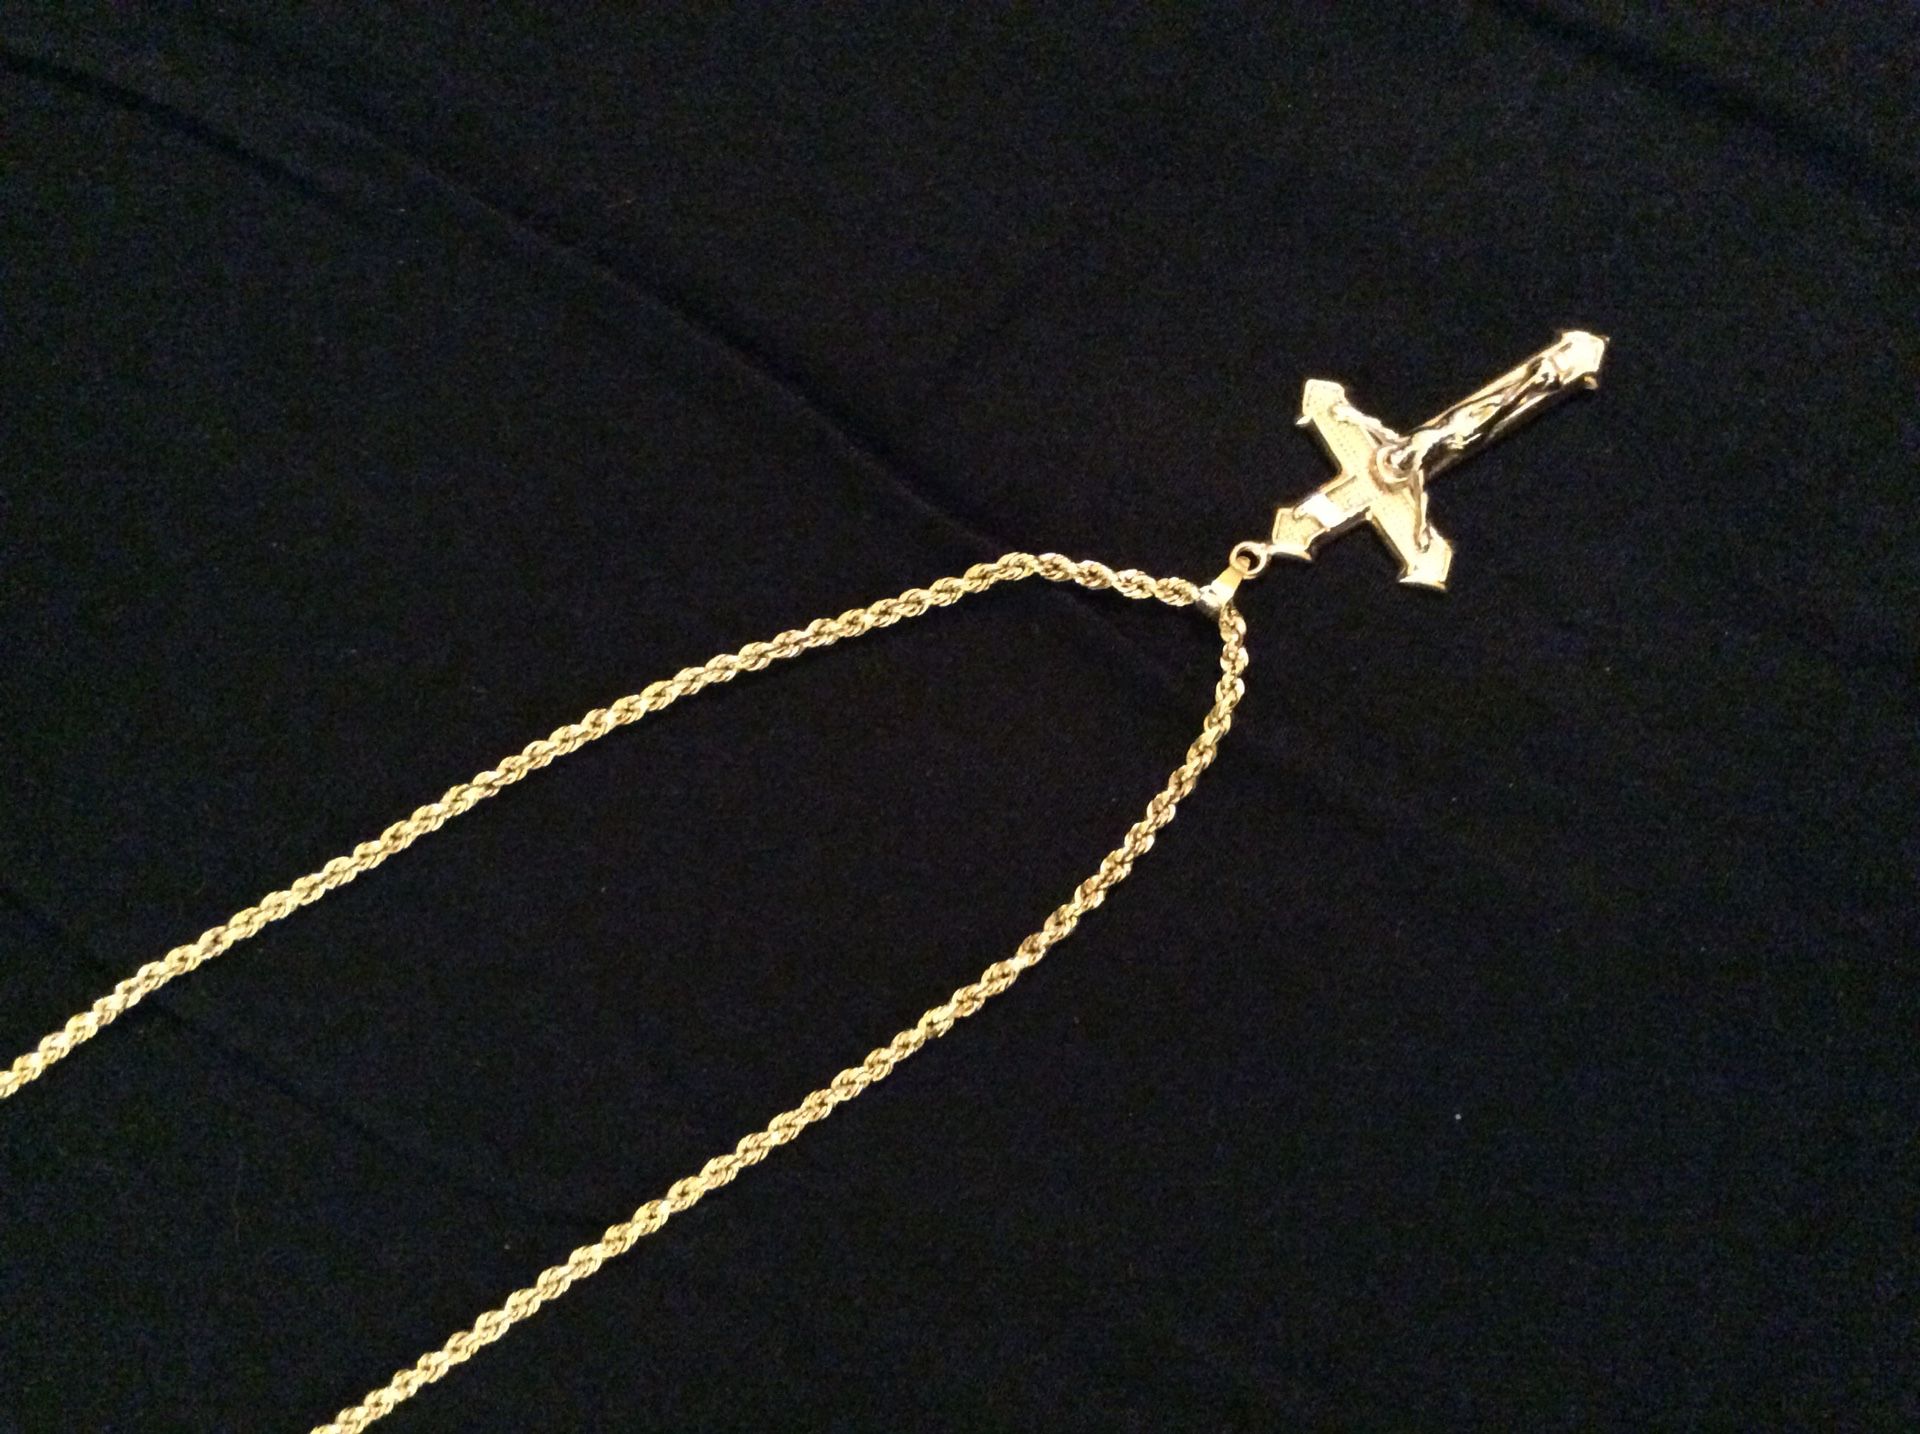 14K Gold Rope Chain with Crusifix Pendant 14K $250